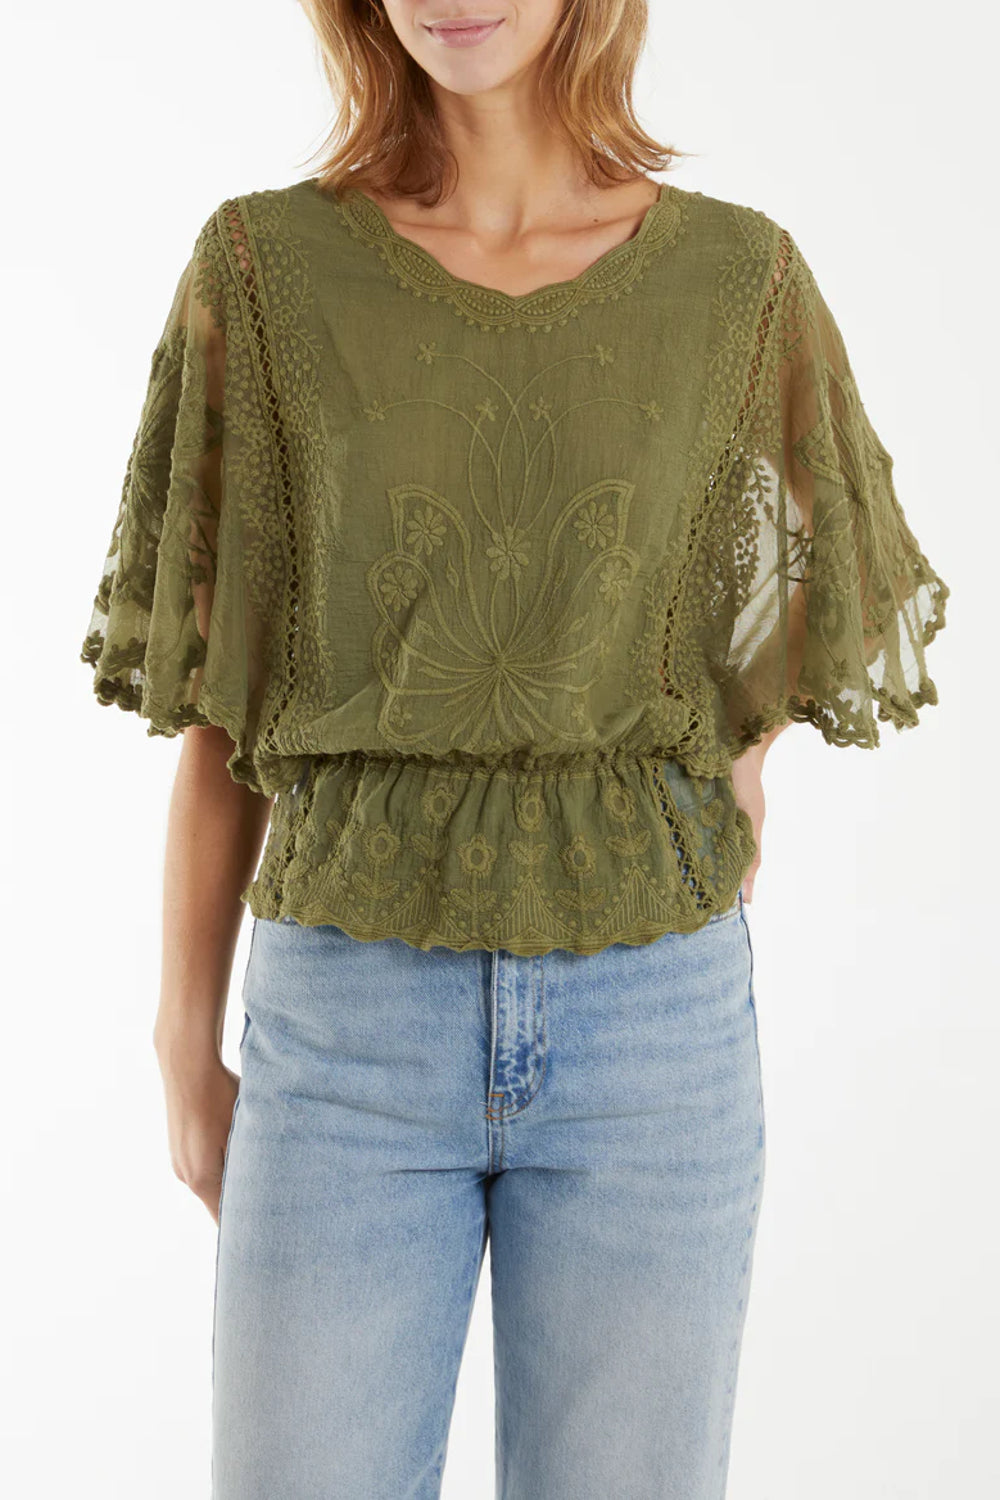 Khaki Floral Lace Butterfly Sleeve Blouse